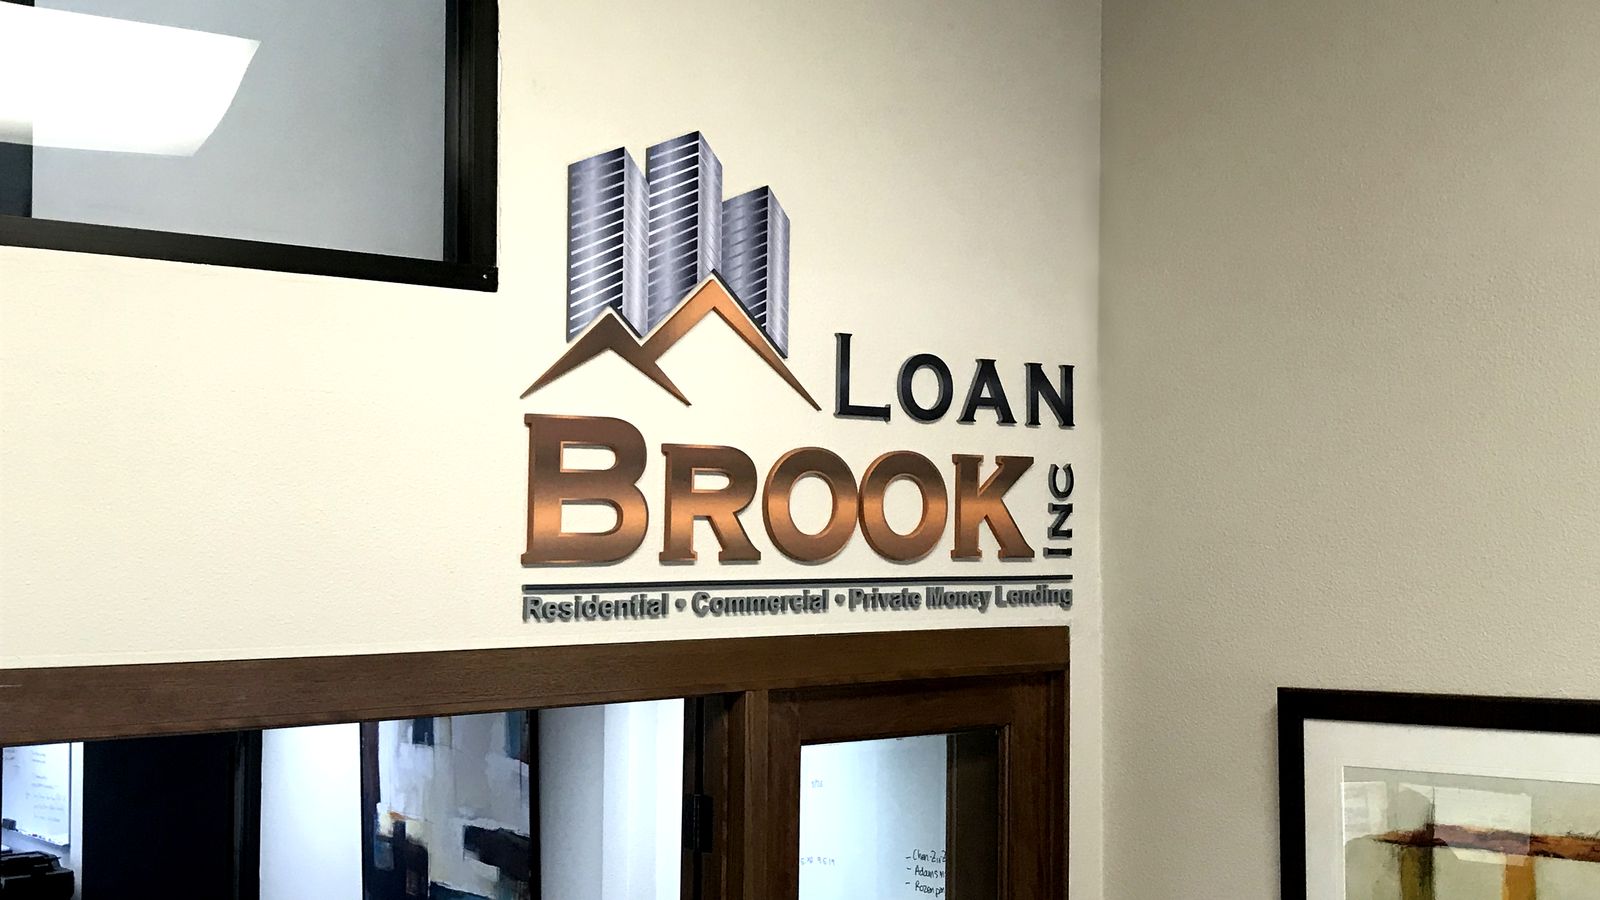 Loan Brook Inc interior business sign with the company name and logo made of painted acrylic